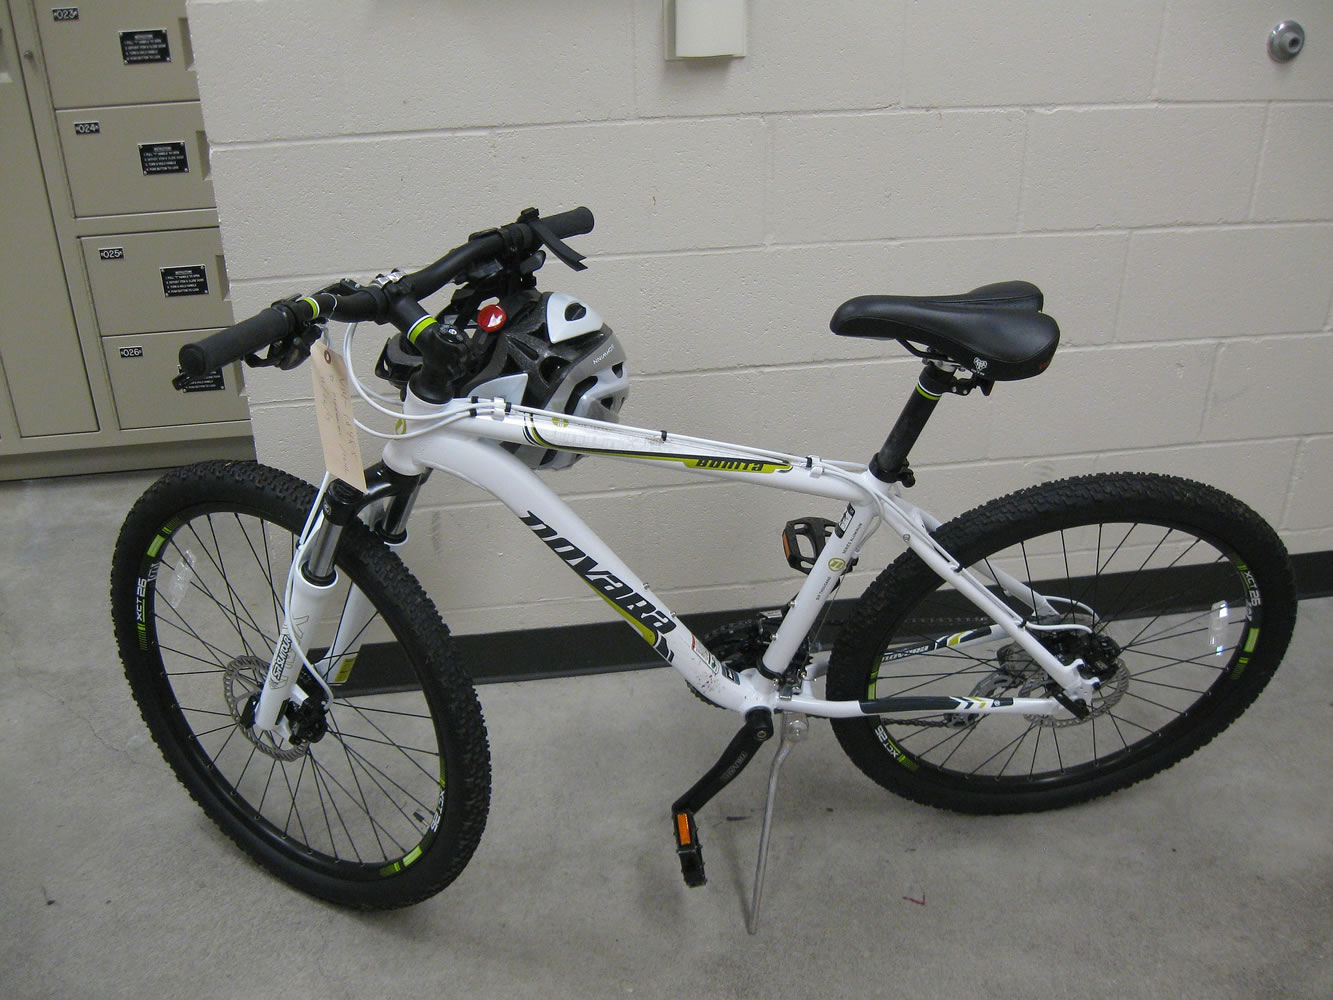 Vancouver police are looking for the owner of this Novara Bonita bicycle which was recovered Wednesday after the theft suspect fled from officers.